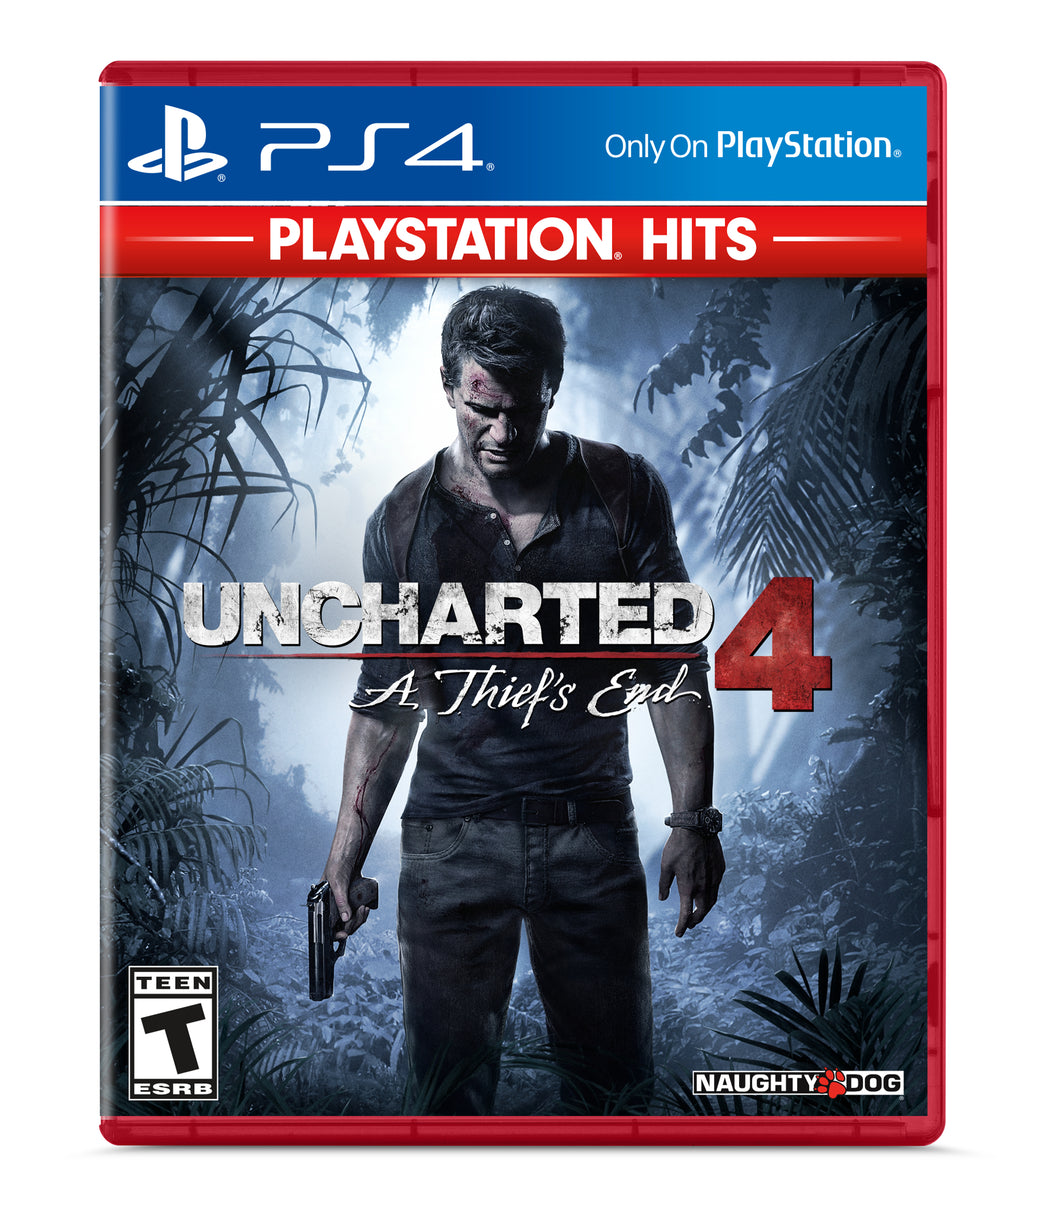 Uncharted 4: A Thief's End - PlayStation Hits